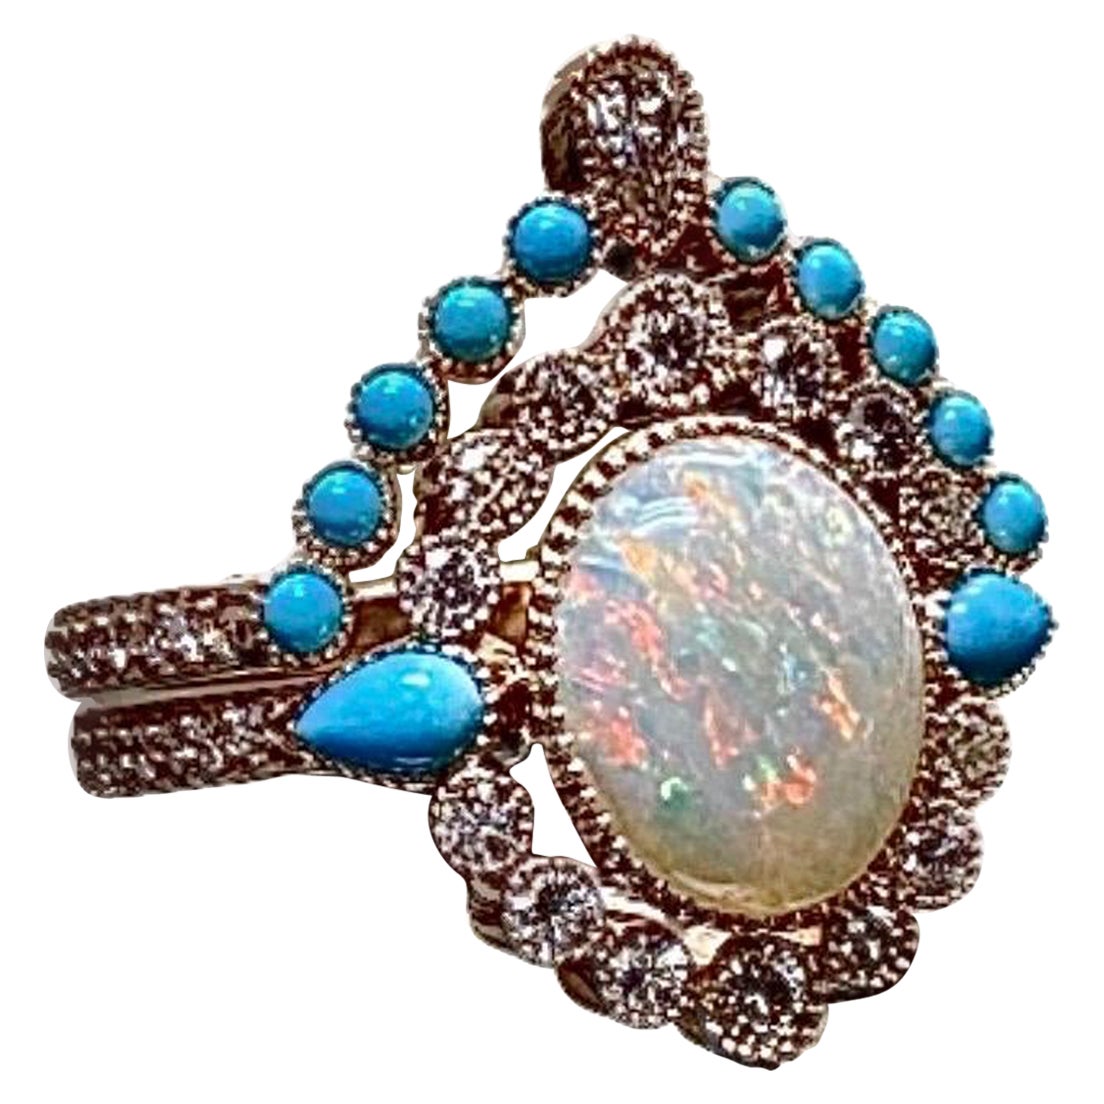 DeKara Designs Collection

Metal- 18K Rose Gold, .750.

Stones- Center Features an Oval Fiery Australian Opal 10 x 8 MM, Two Pear Shaped Sleeping Beauty Turquoise, 10 Round Sleeping Beauty Turquoise, 1 Pear Shape Diamond, 30 Round Diamonds F-G Color